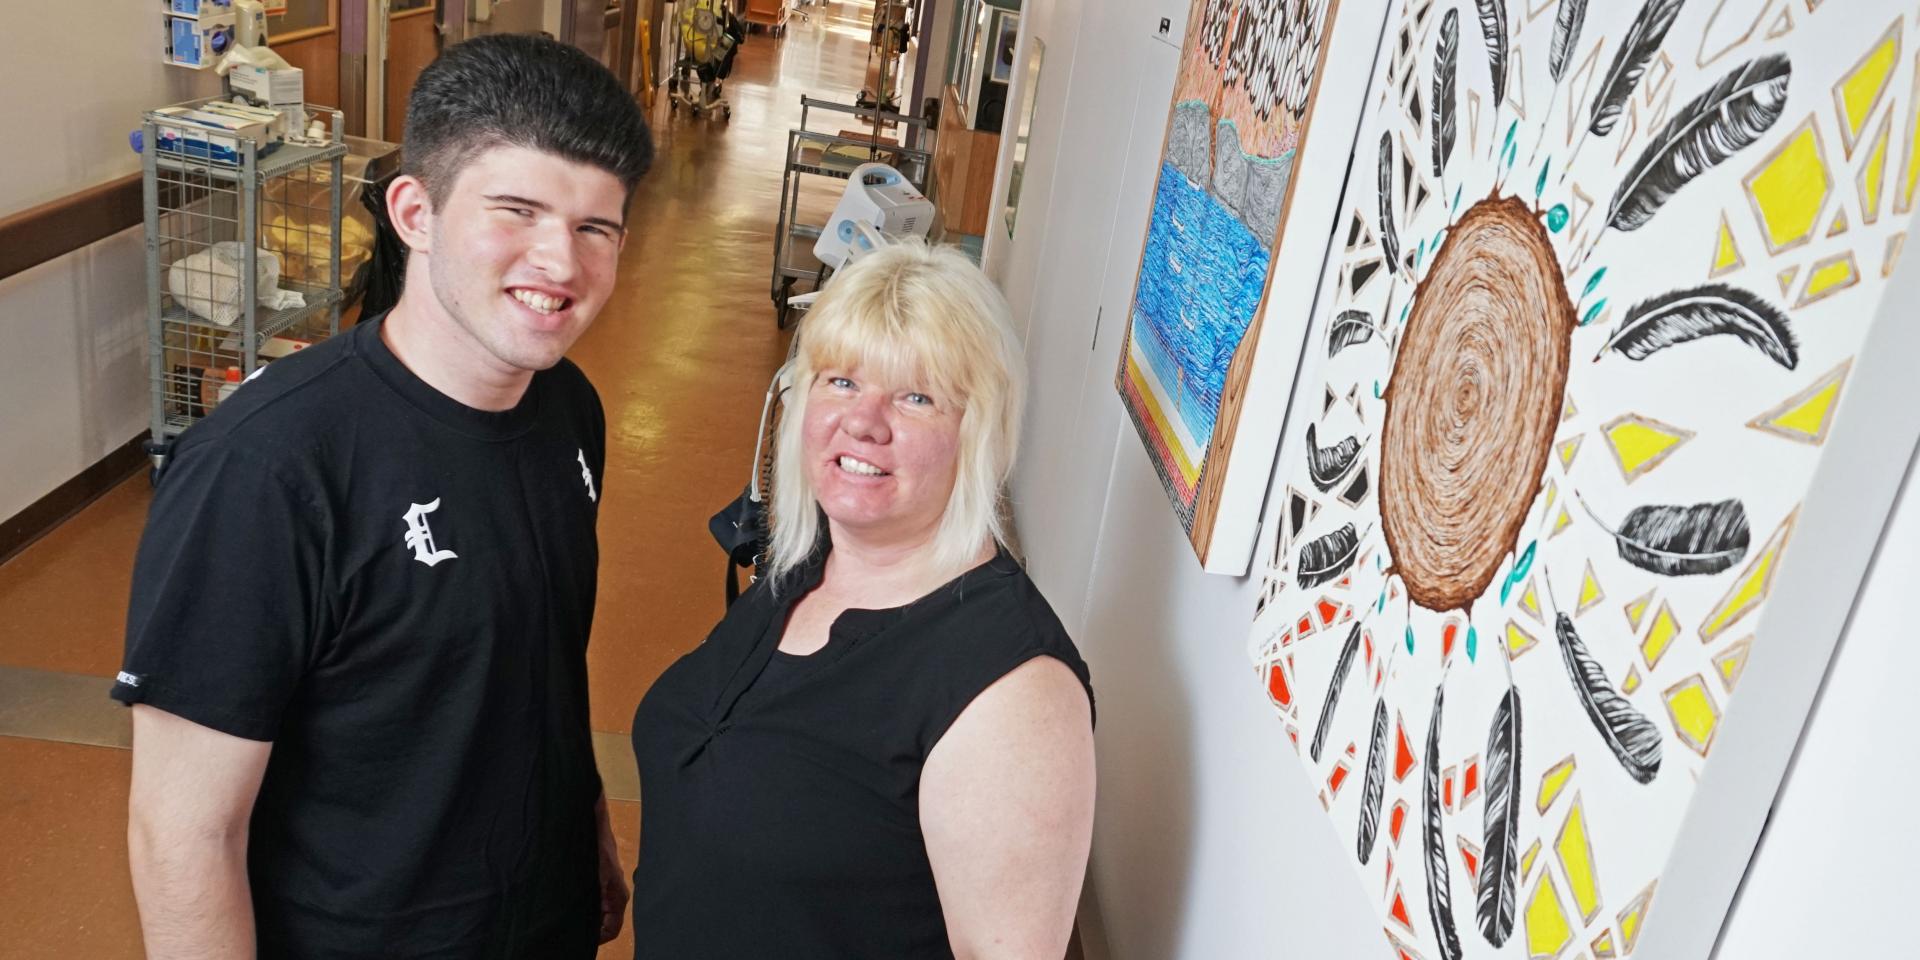 Darene Gallie and son Joey Raposo standing in front of Healing Room paintings